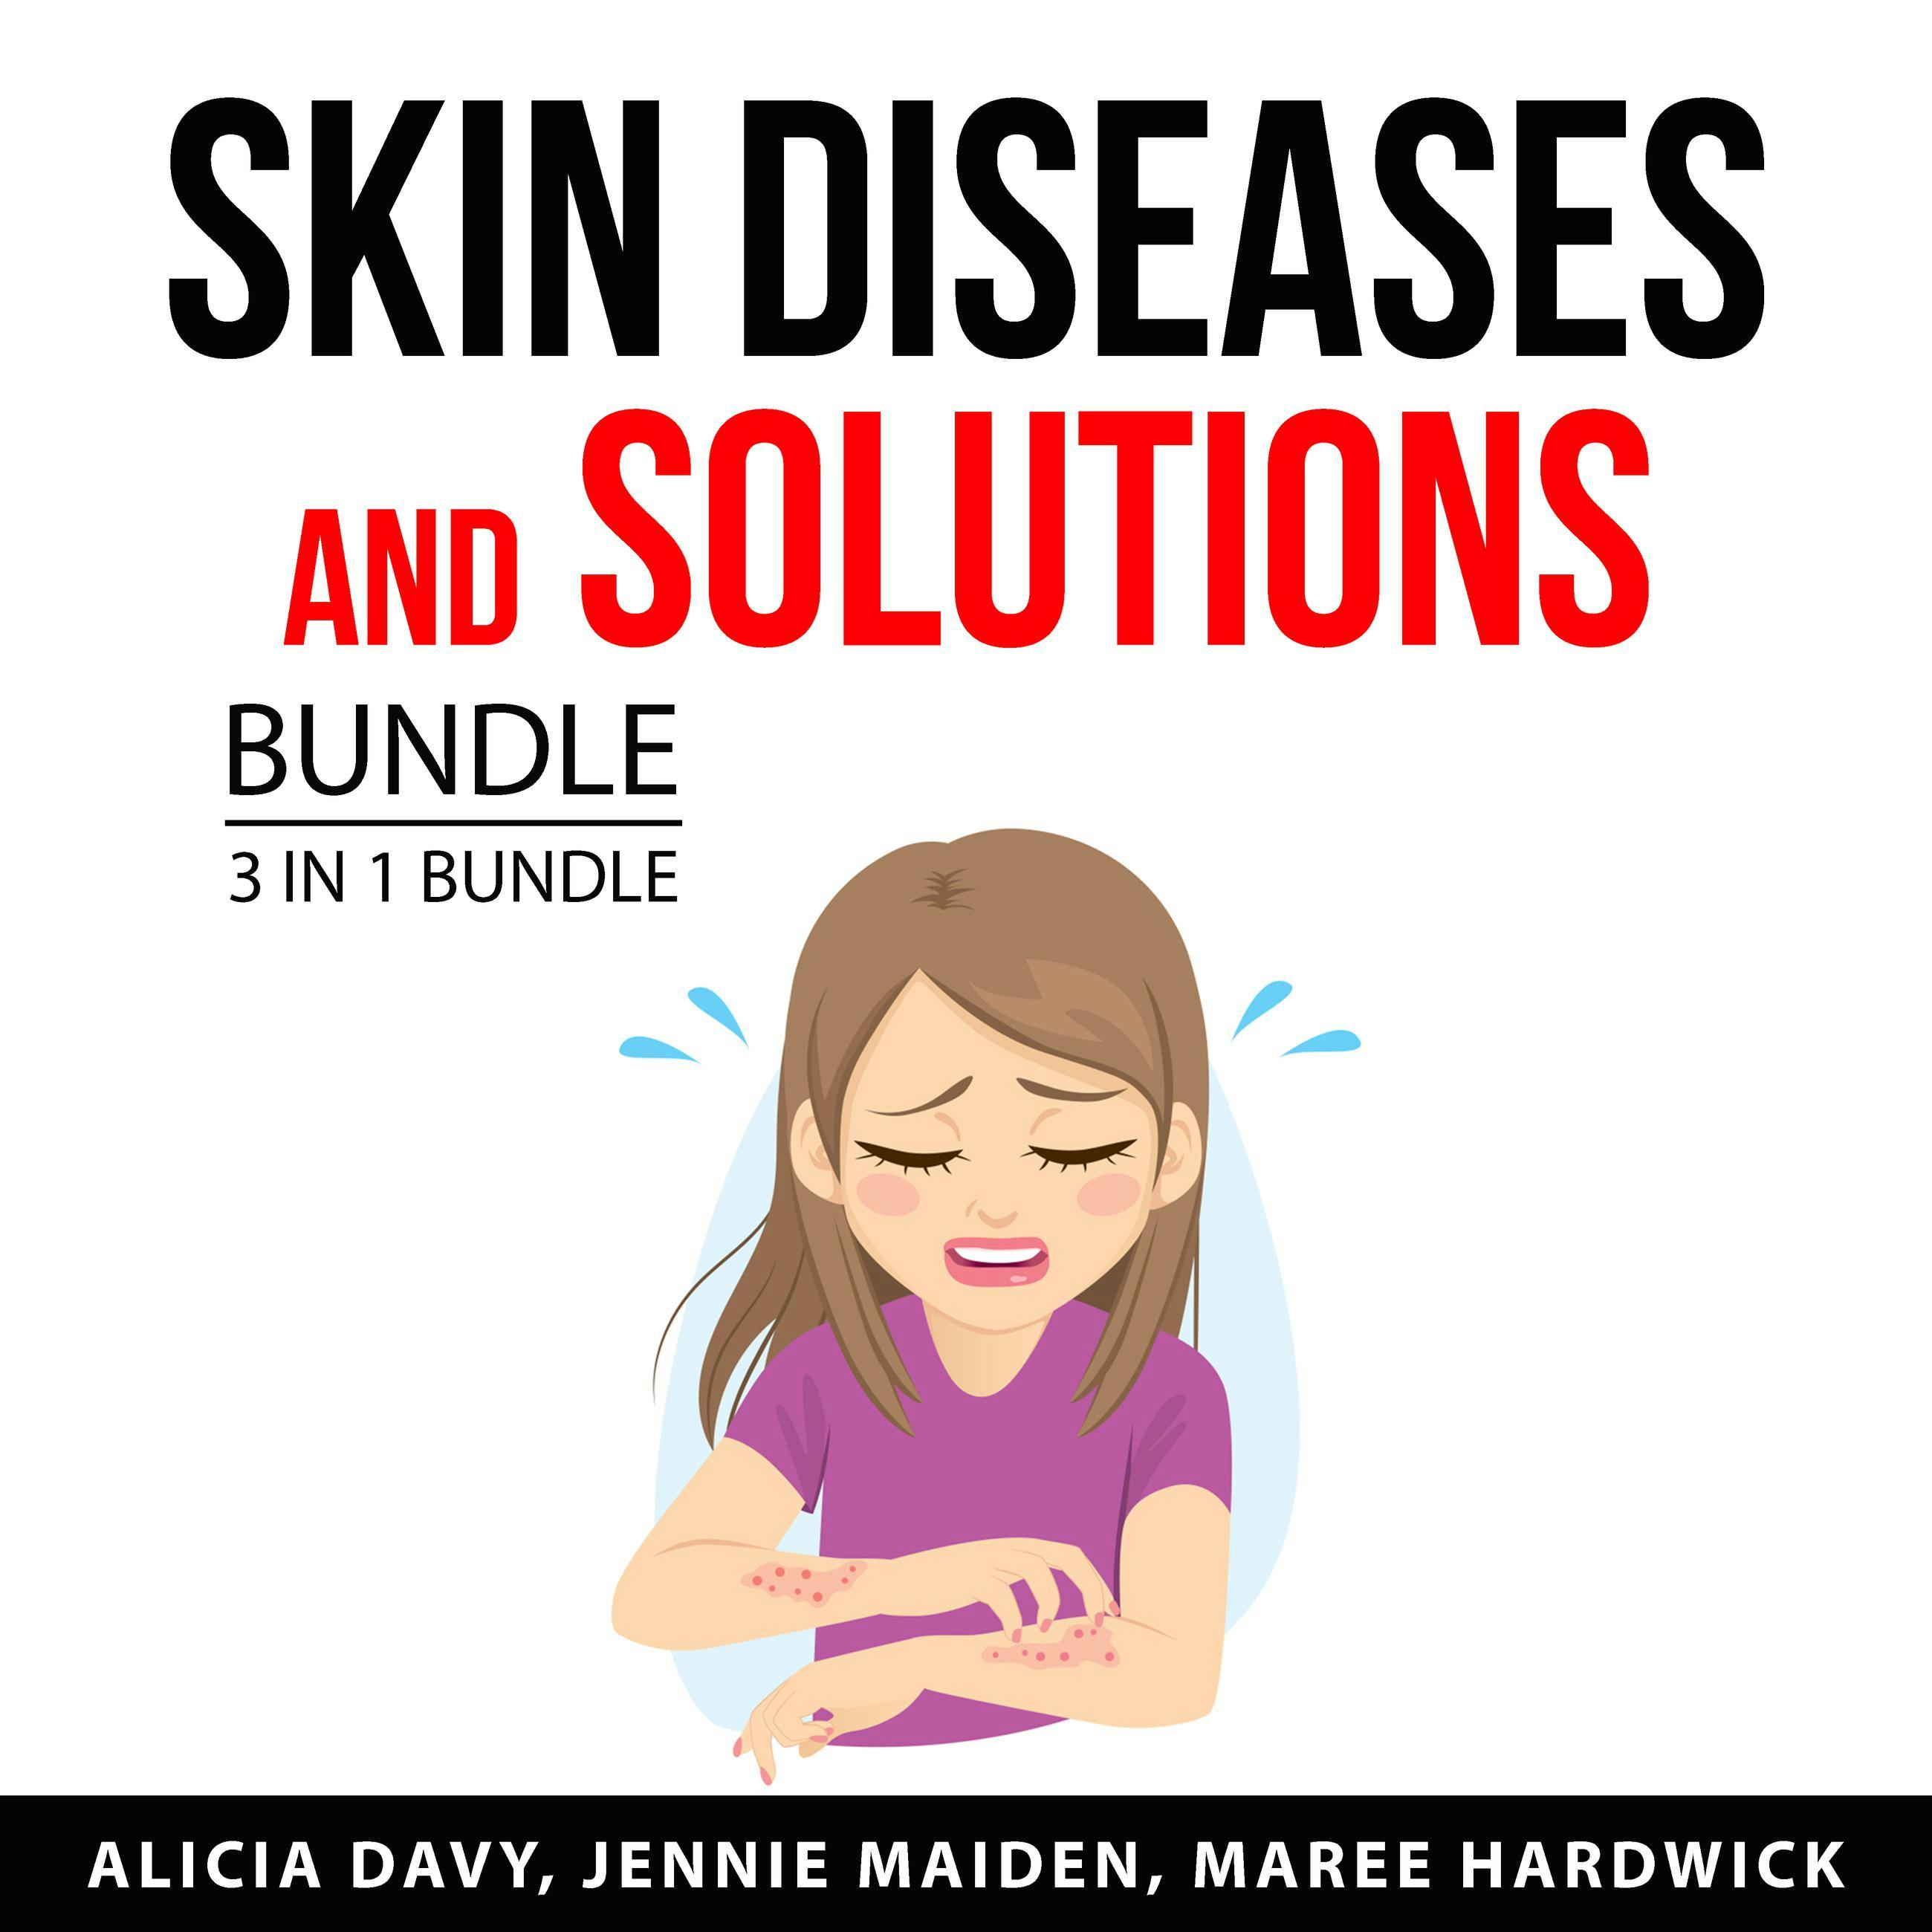 Skin Diseases and Solutions Bundle, 3 in 1 Bundle: Get Rid of Acne, Healing Eczema, and Psoriasis Management and Treatment - Jennie Maiden, Alicia Davy, Maree Hardwick